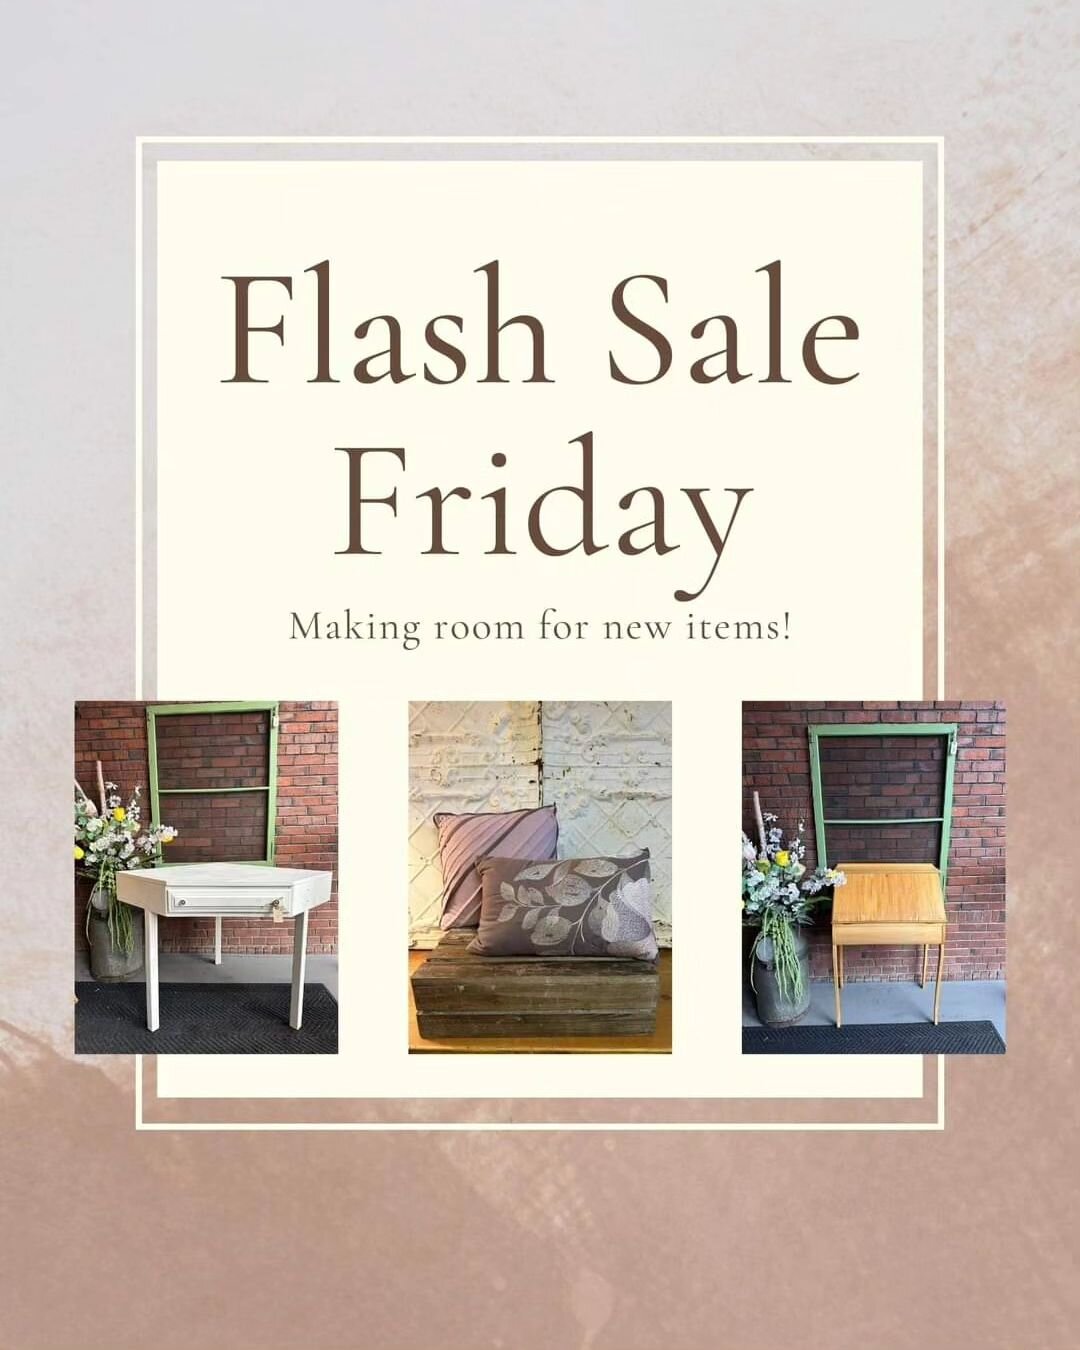 It's ⚡️FLASH SALE FRIDAY⚡️ at Eddy Street, and we need these items GONE to make room for some BIG PLANS! Many of the items, including the bedding sets, were used for staging and are in great condition! Items are sold as is. Send us a DM if interested